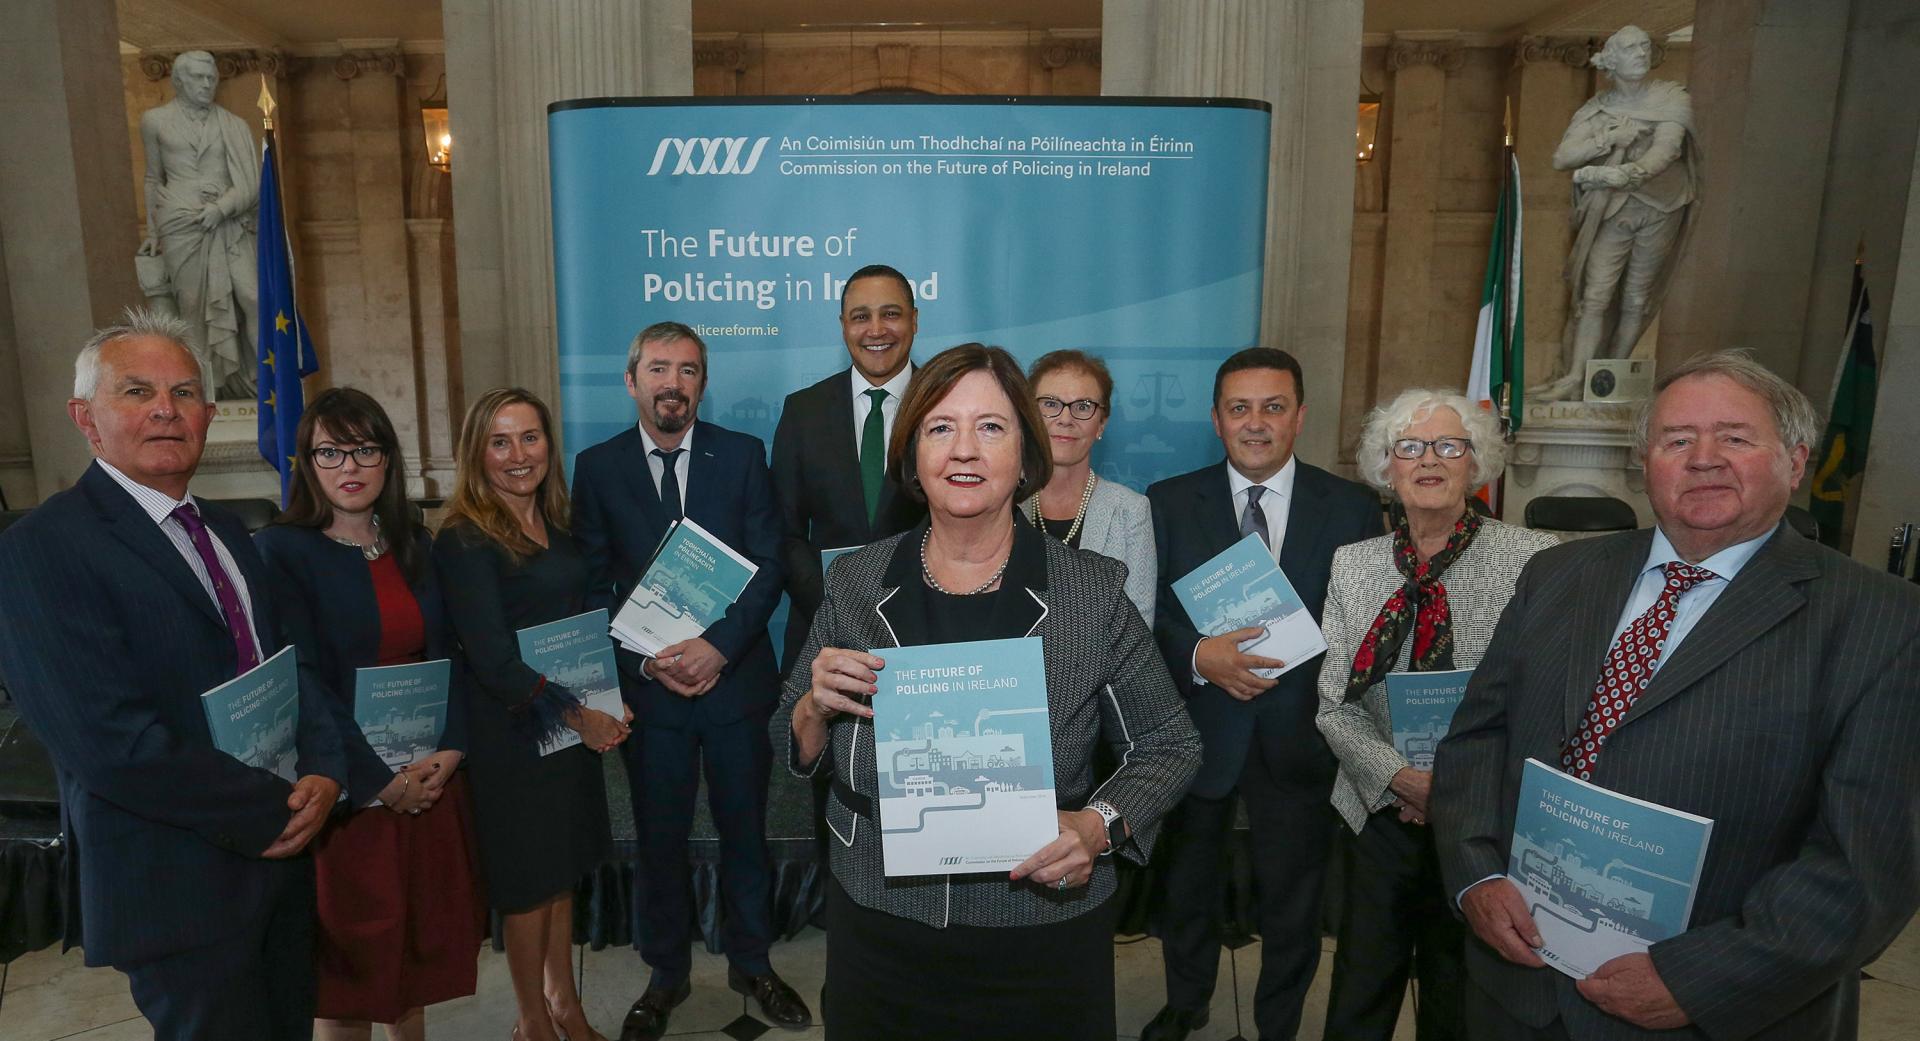 DCU Dr Vicky Conway Commission on the Future of Policing in Ireland report published